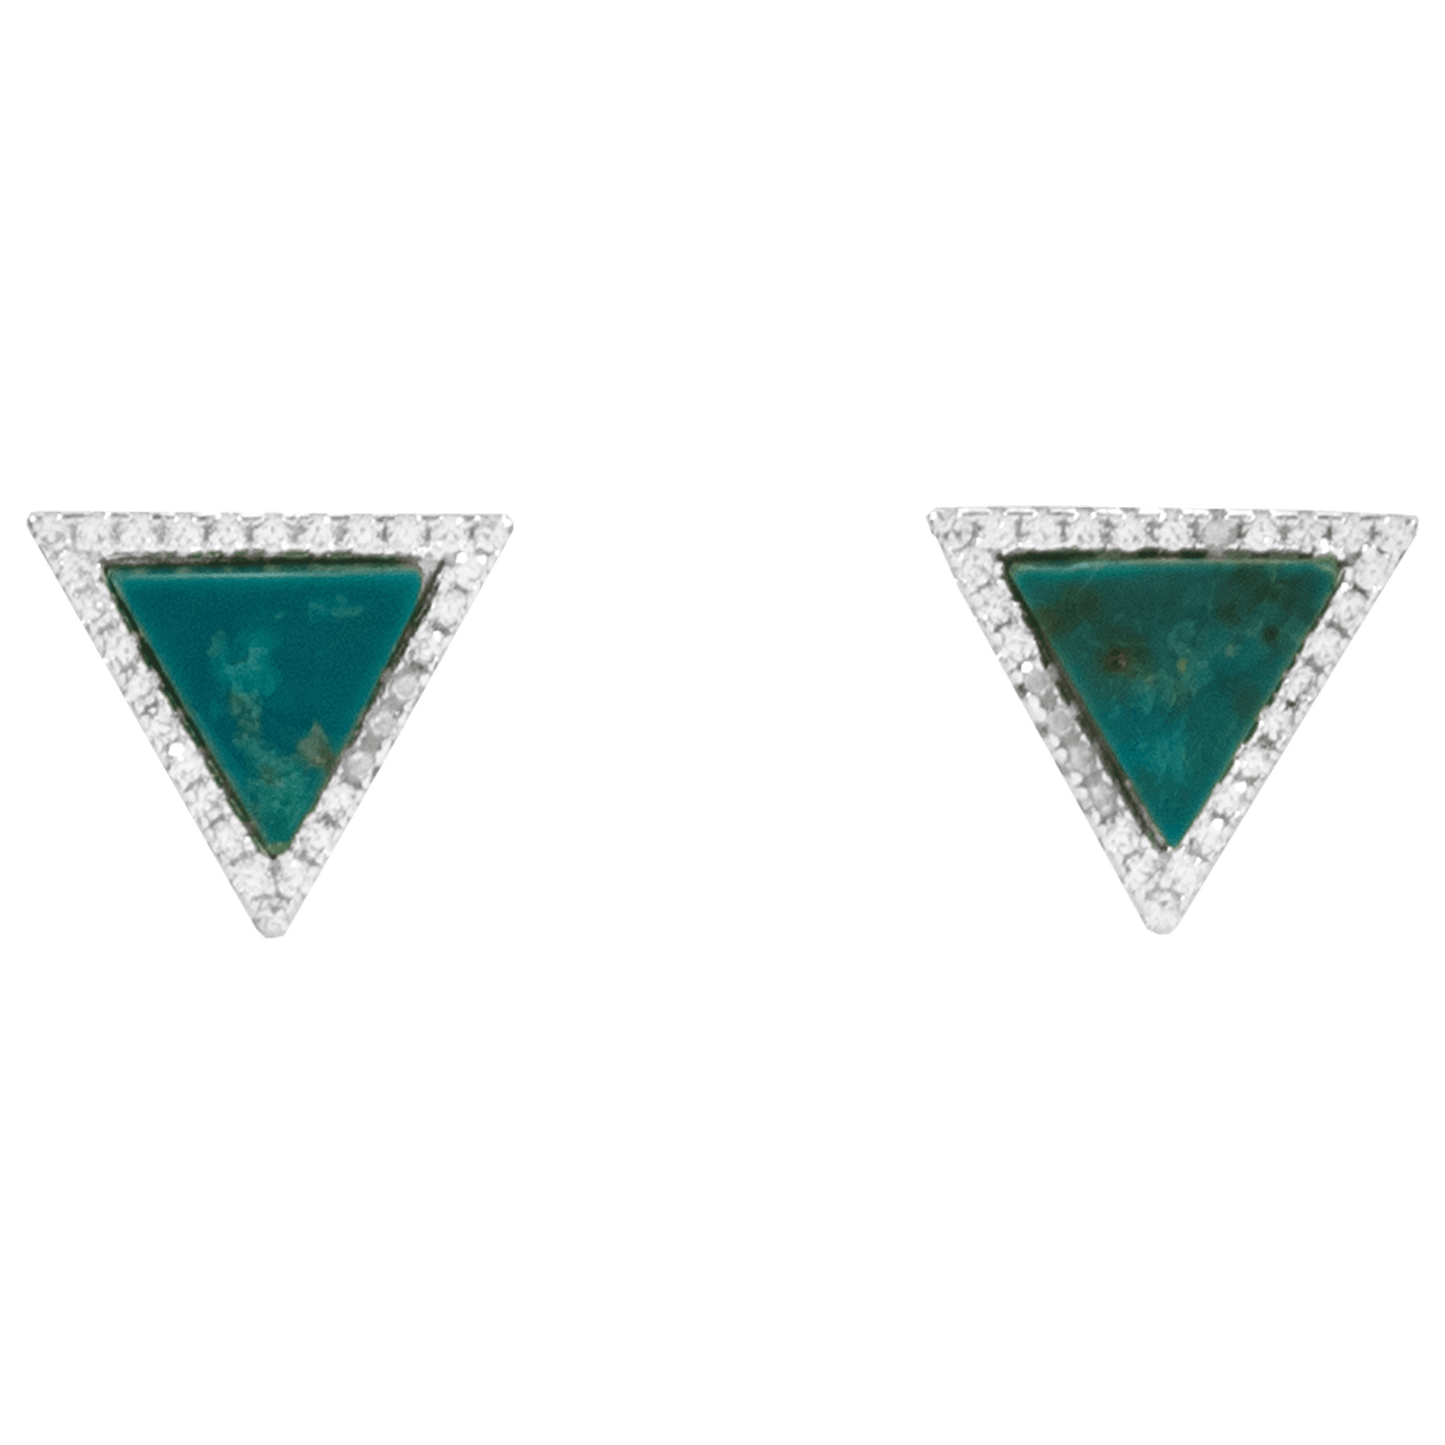 Triangle Eilat Stone Stud Earrings with Crystals along the edges